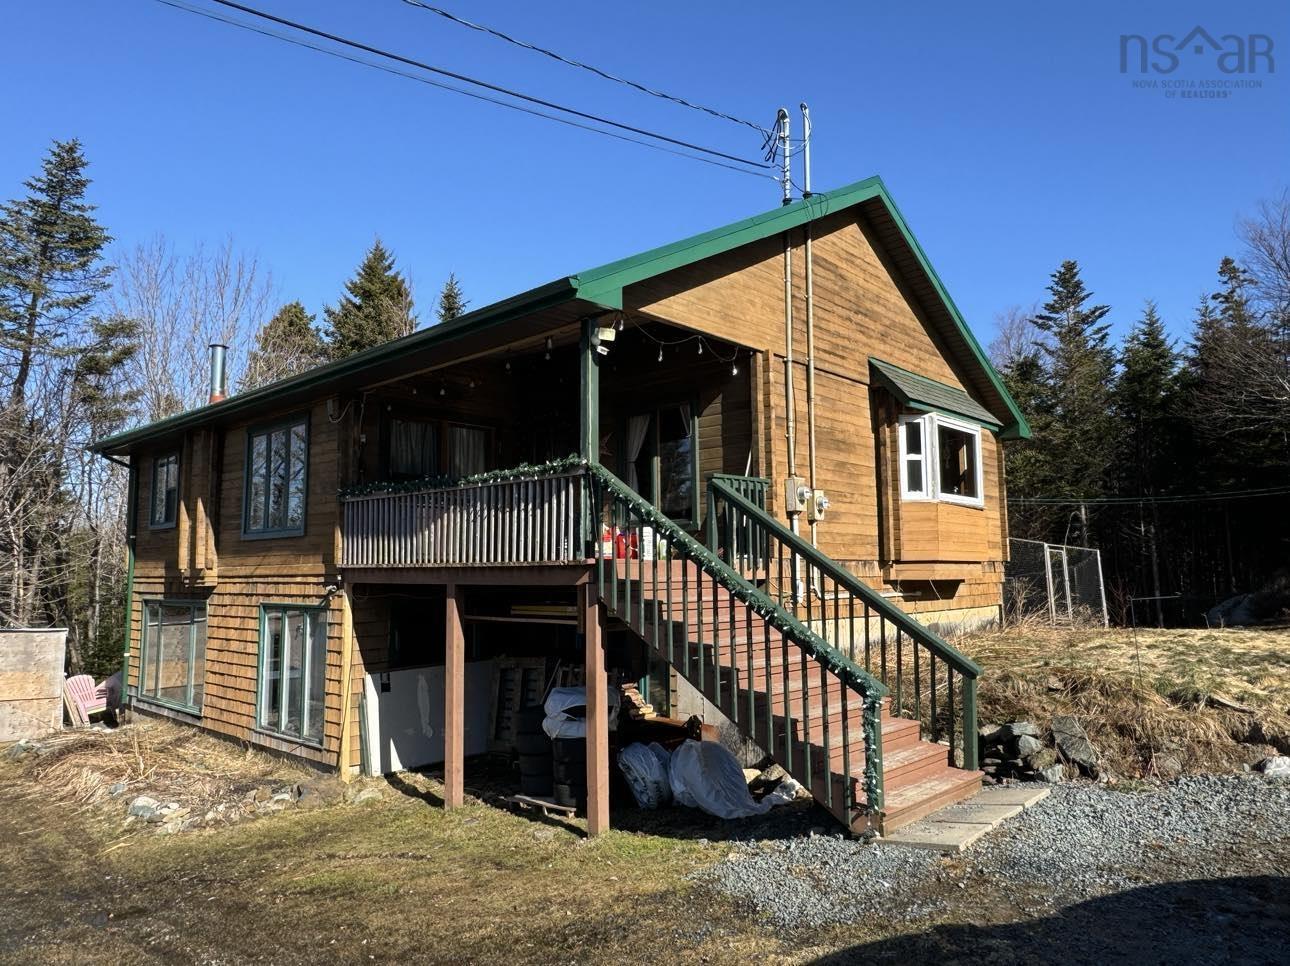 8683 Highway 7, Smiths Settlement NS - MLS<sup>®</sup>: # 202405961